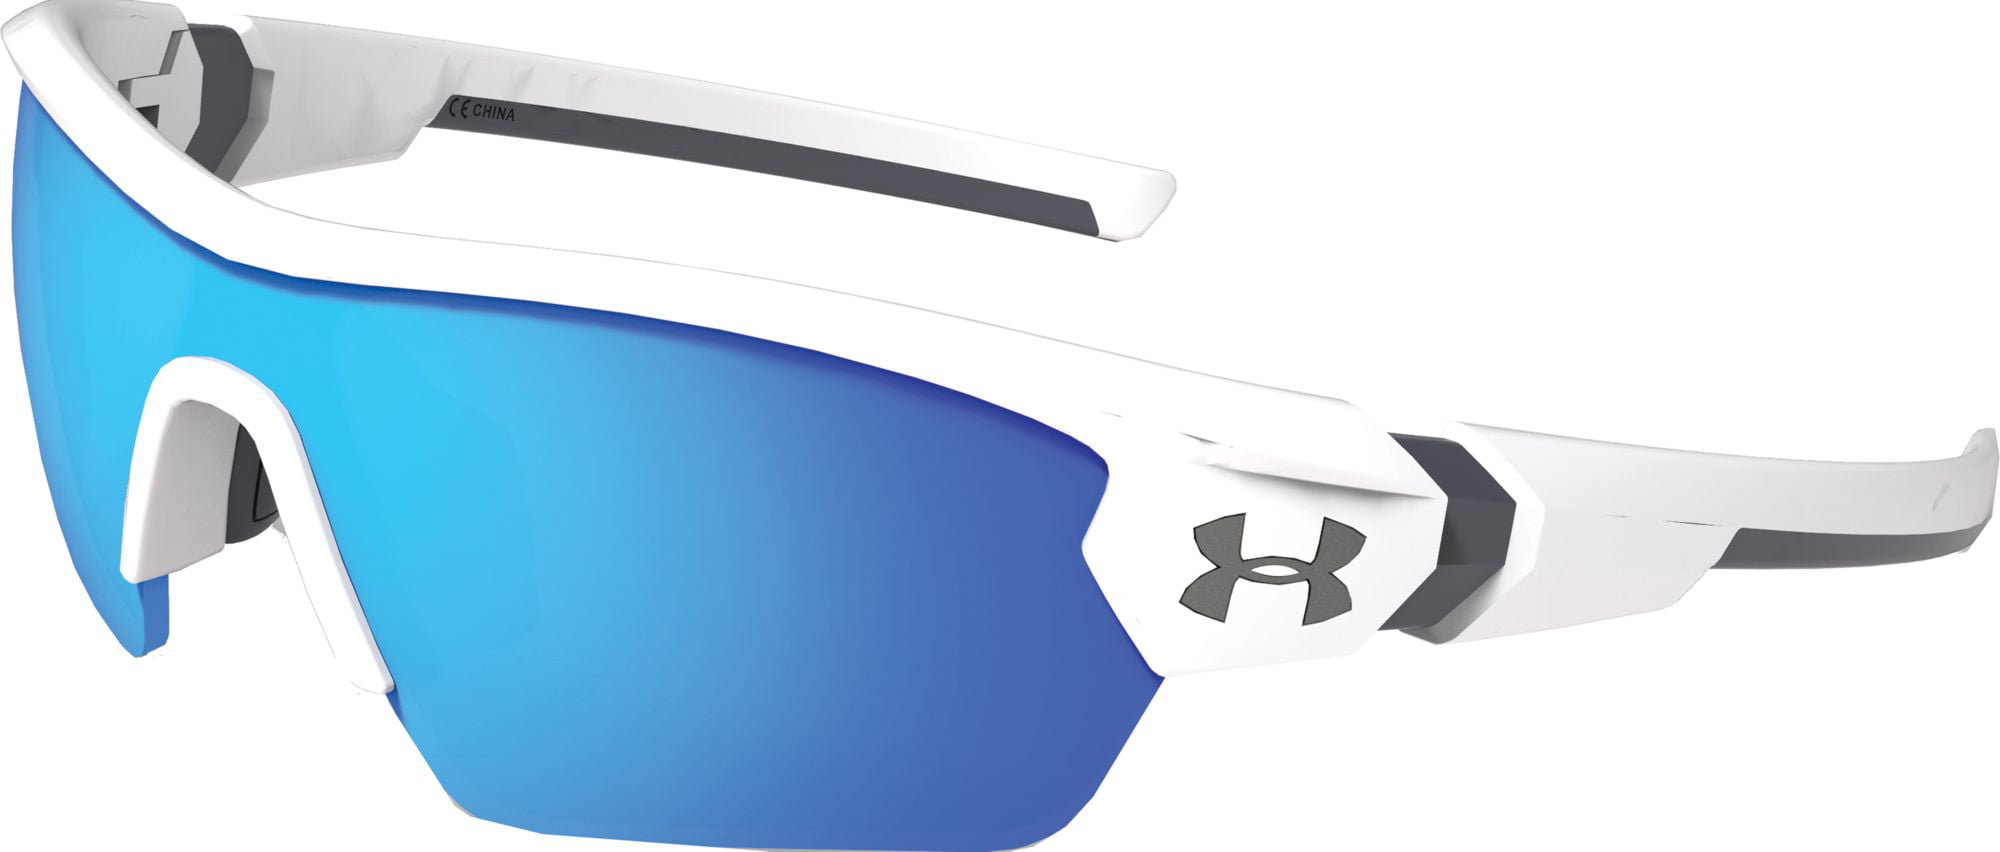 Under Armour Youth Menace Sunglasses 